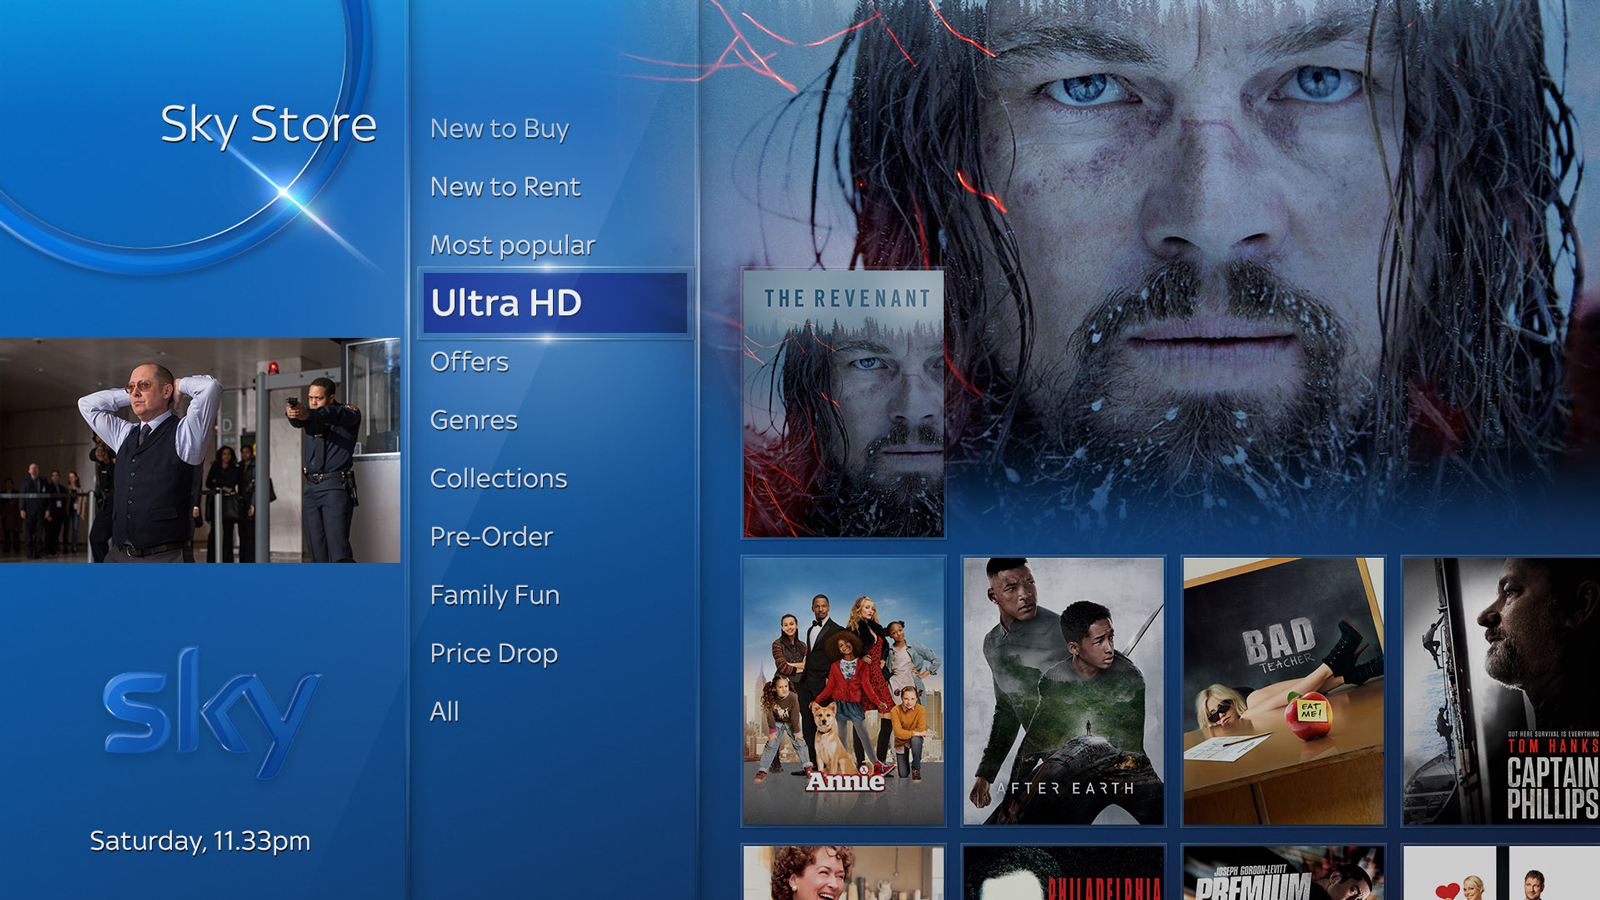 5) Sky Q 4K channel: there isn’t one